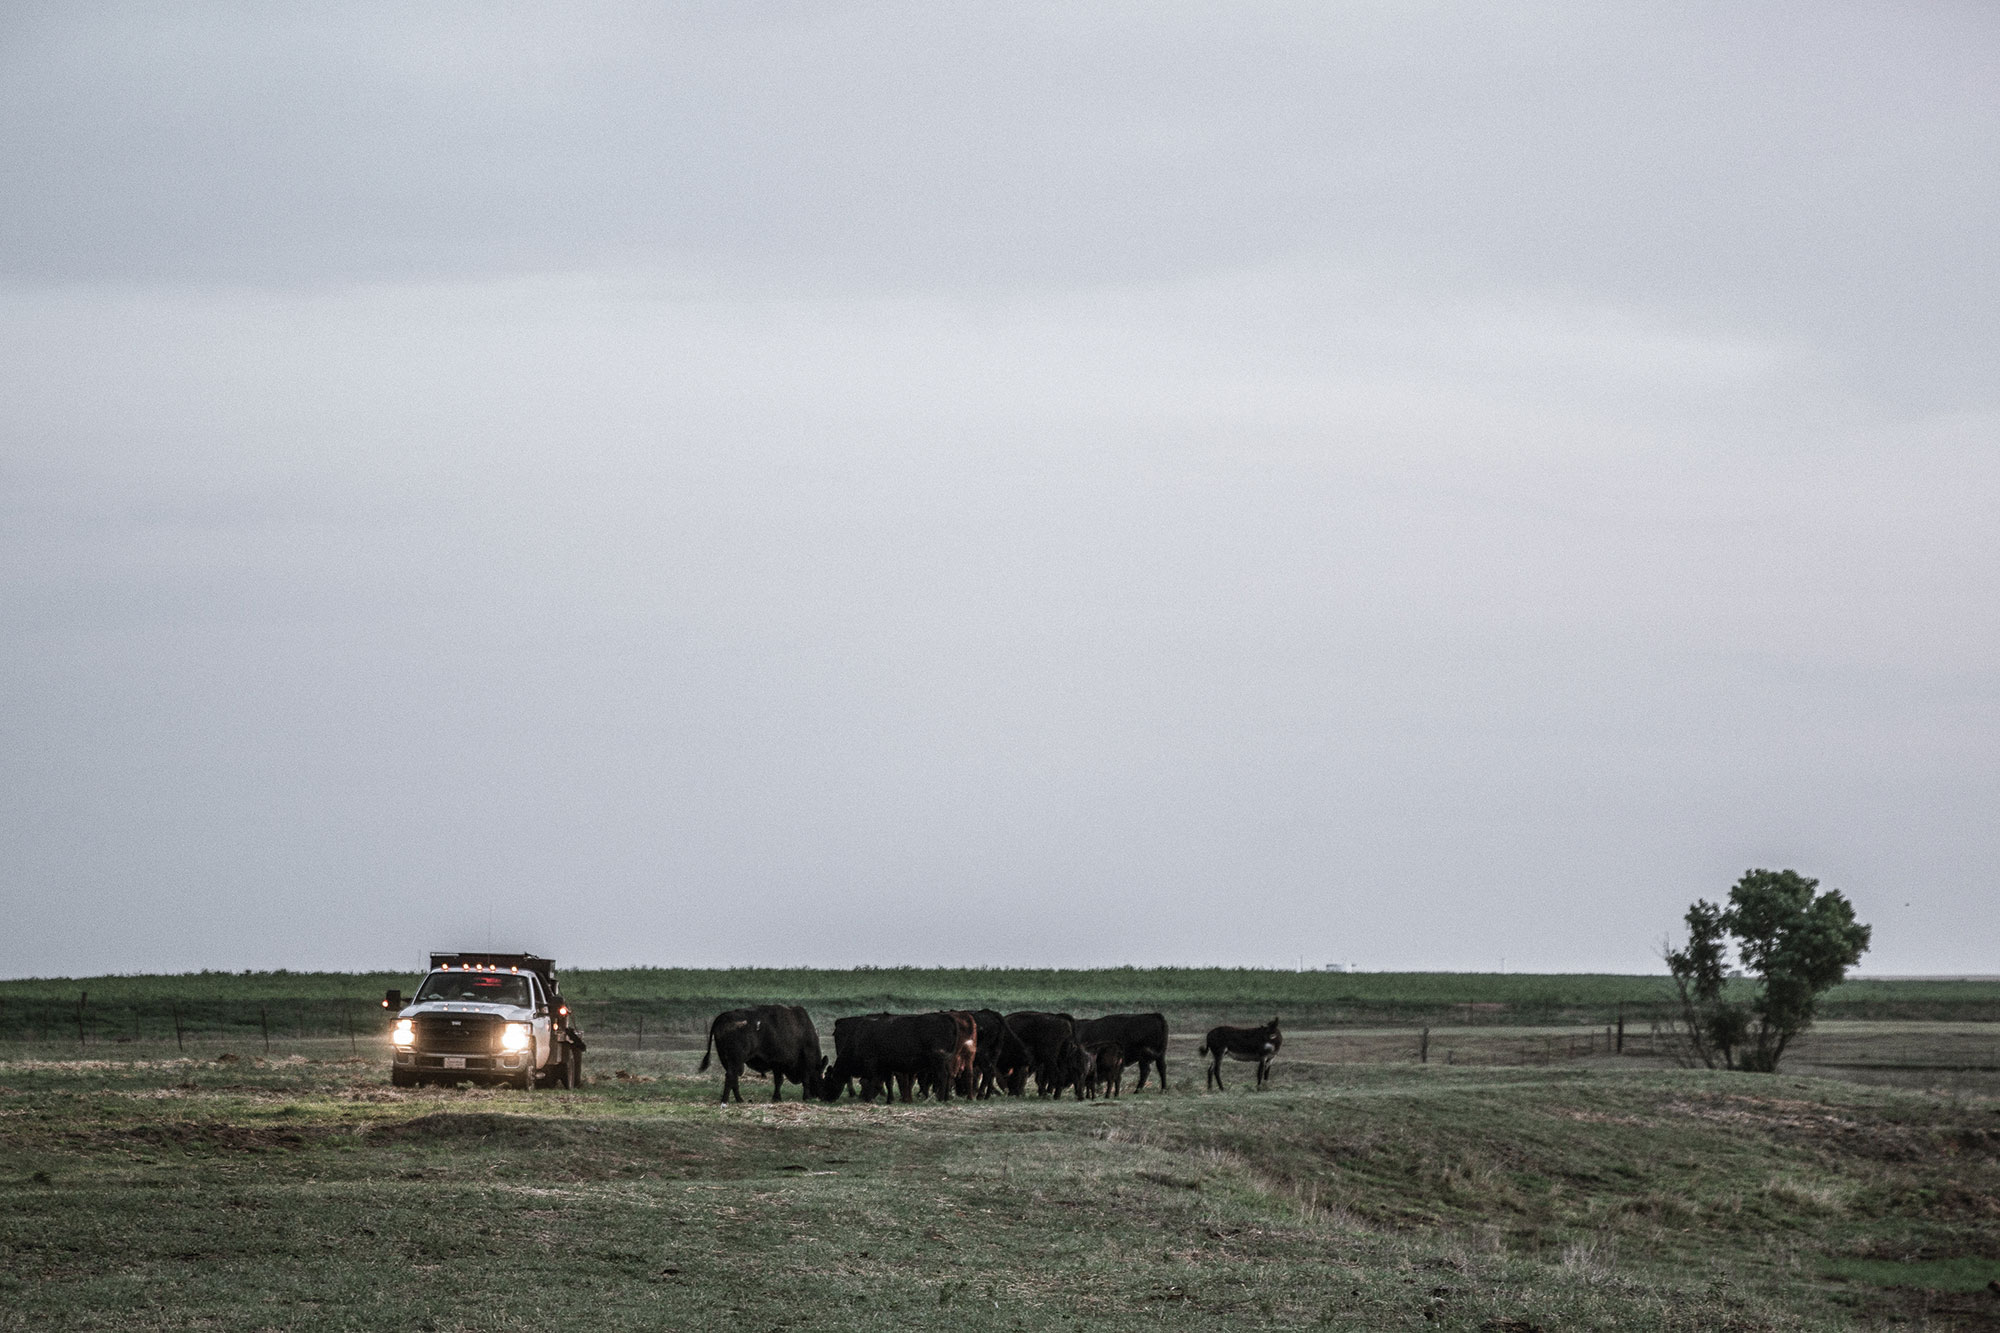 Jimmy Emmons drives his truck through the pasture to check on his cattle.